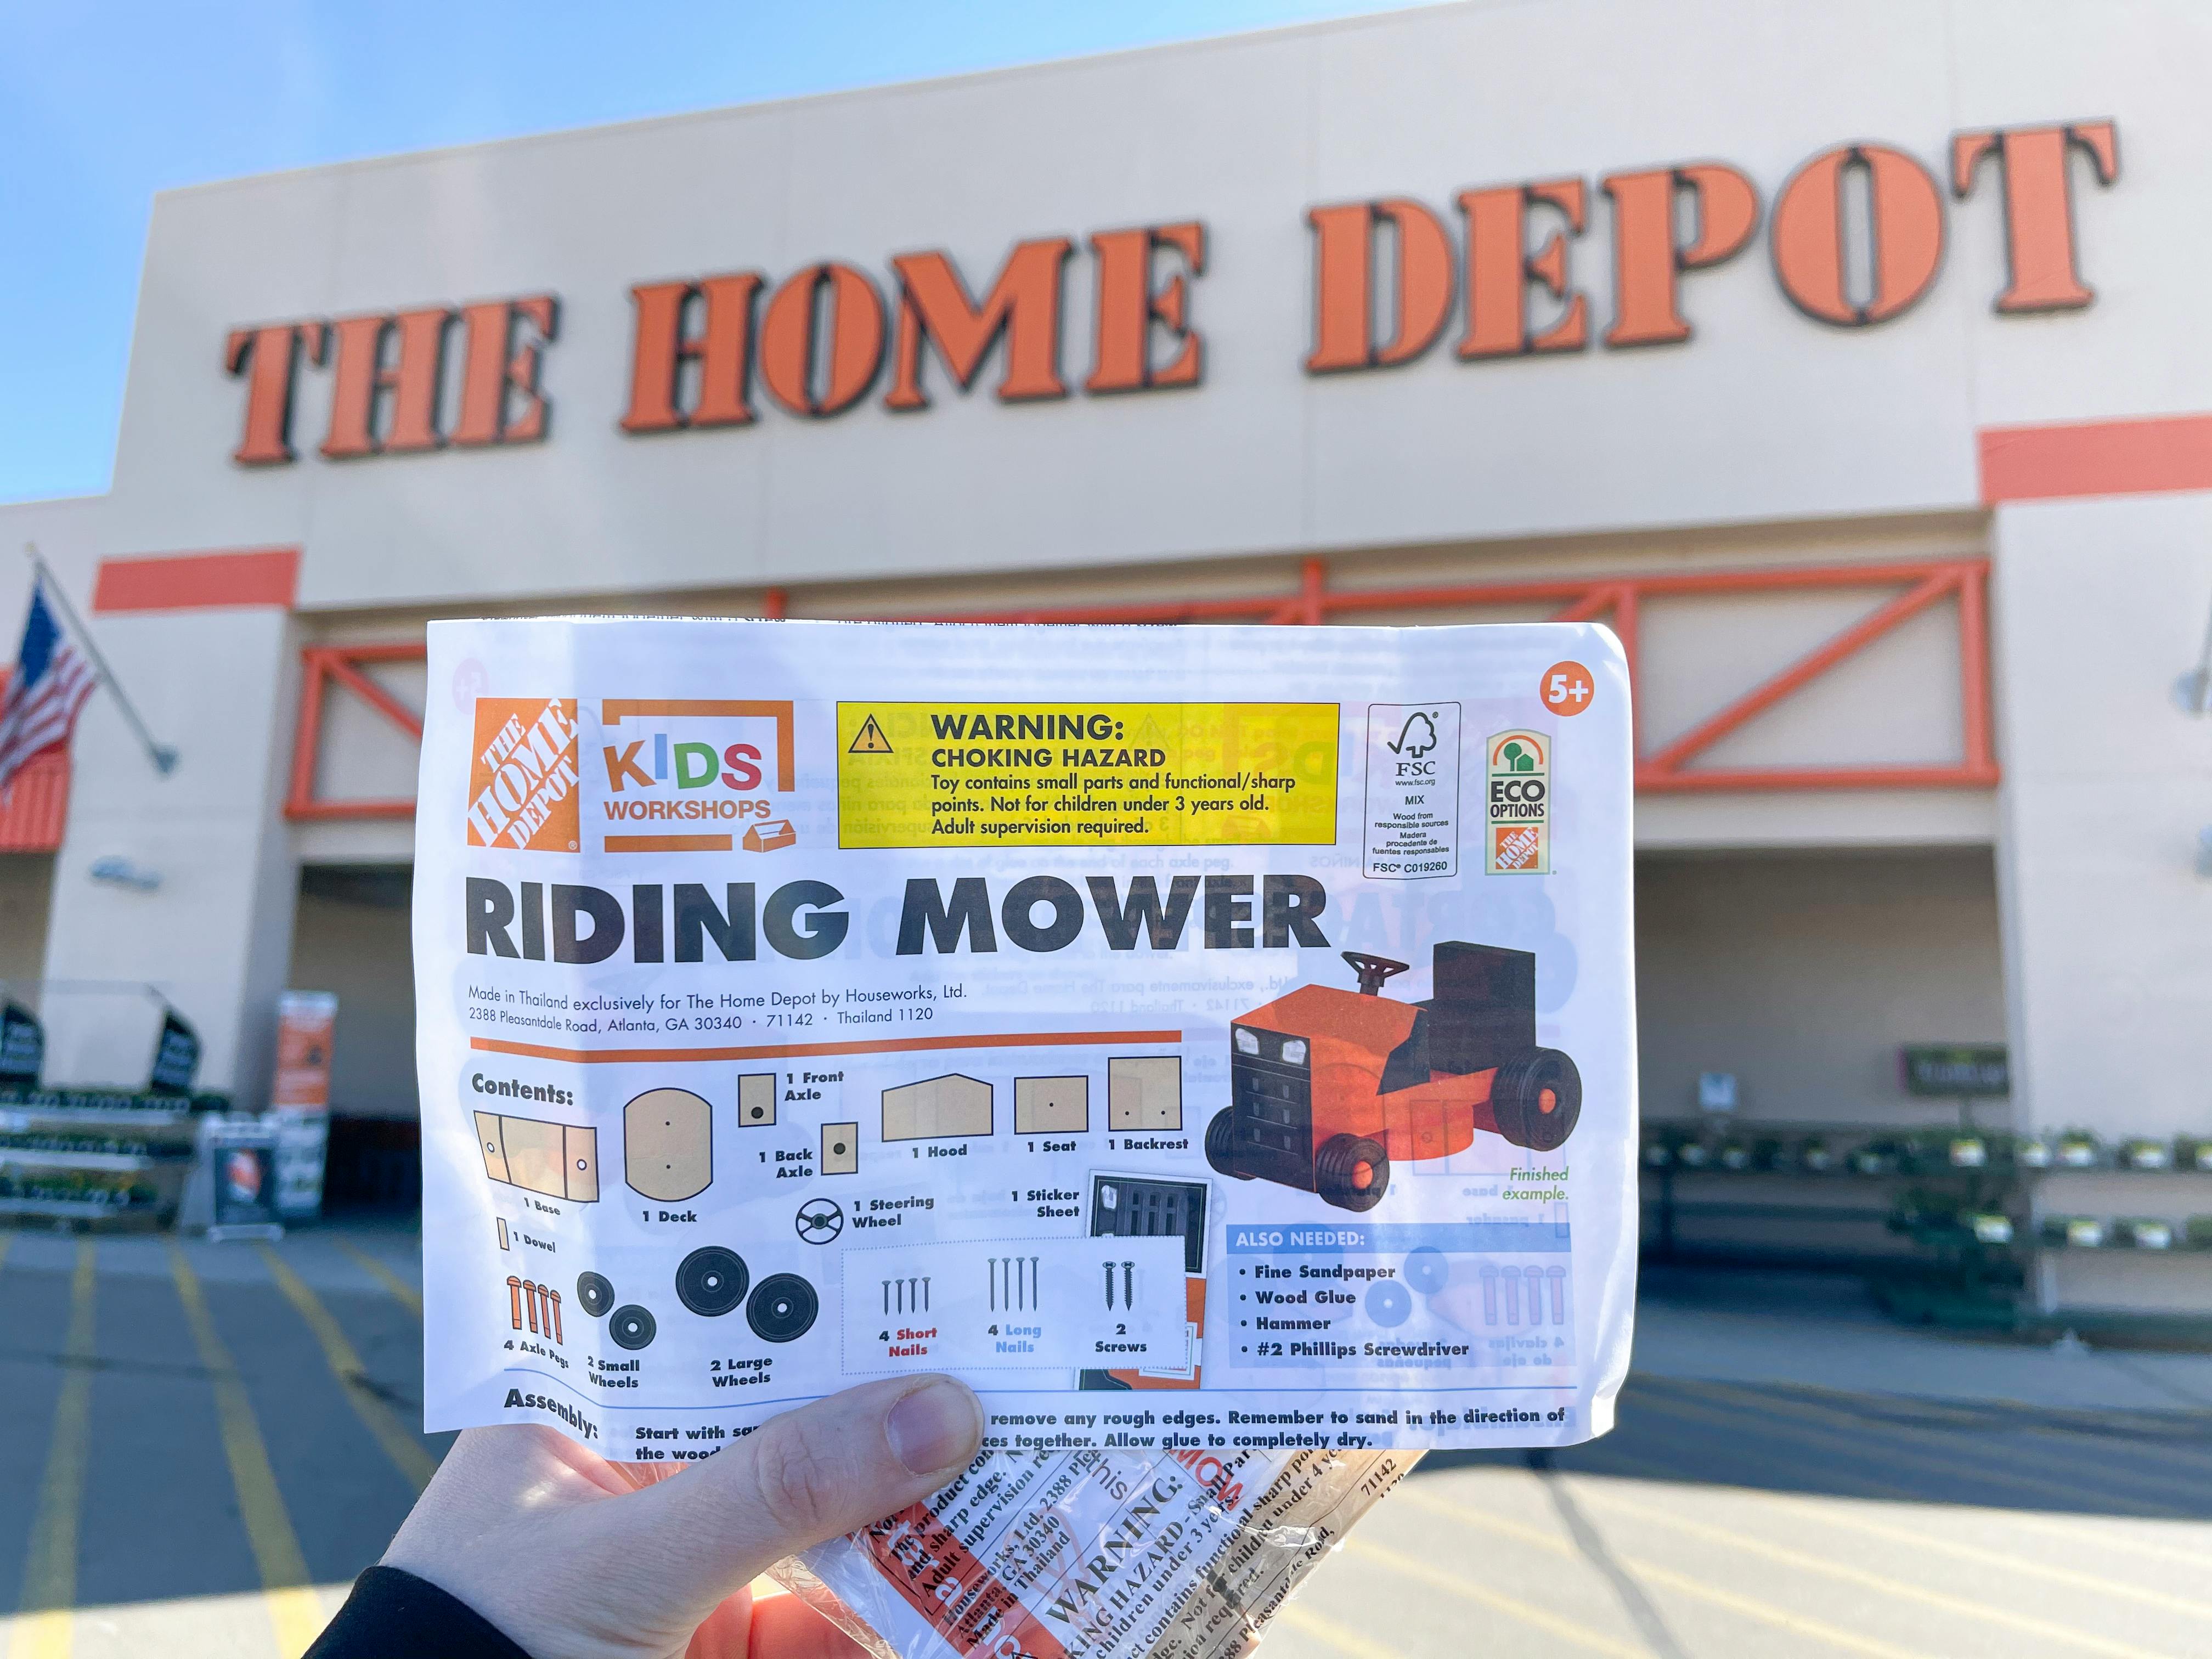 A Home Depot Kids Workshops Riding Mower kit held in front of a Home Depot storefront.